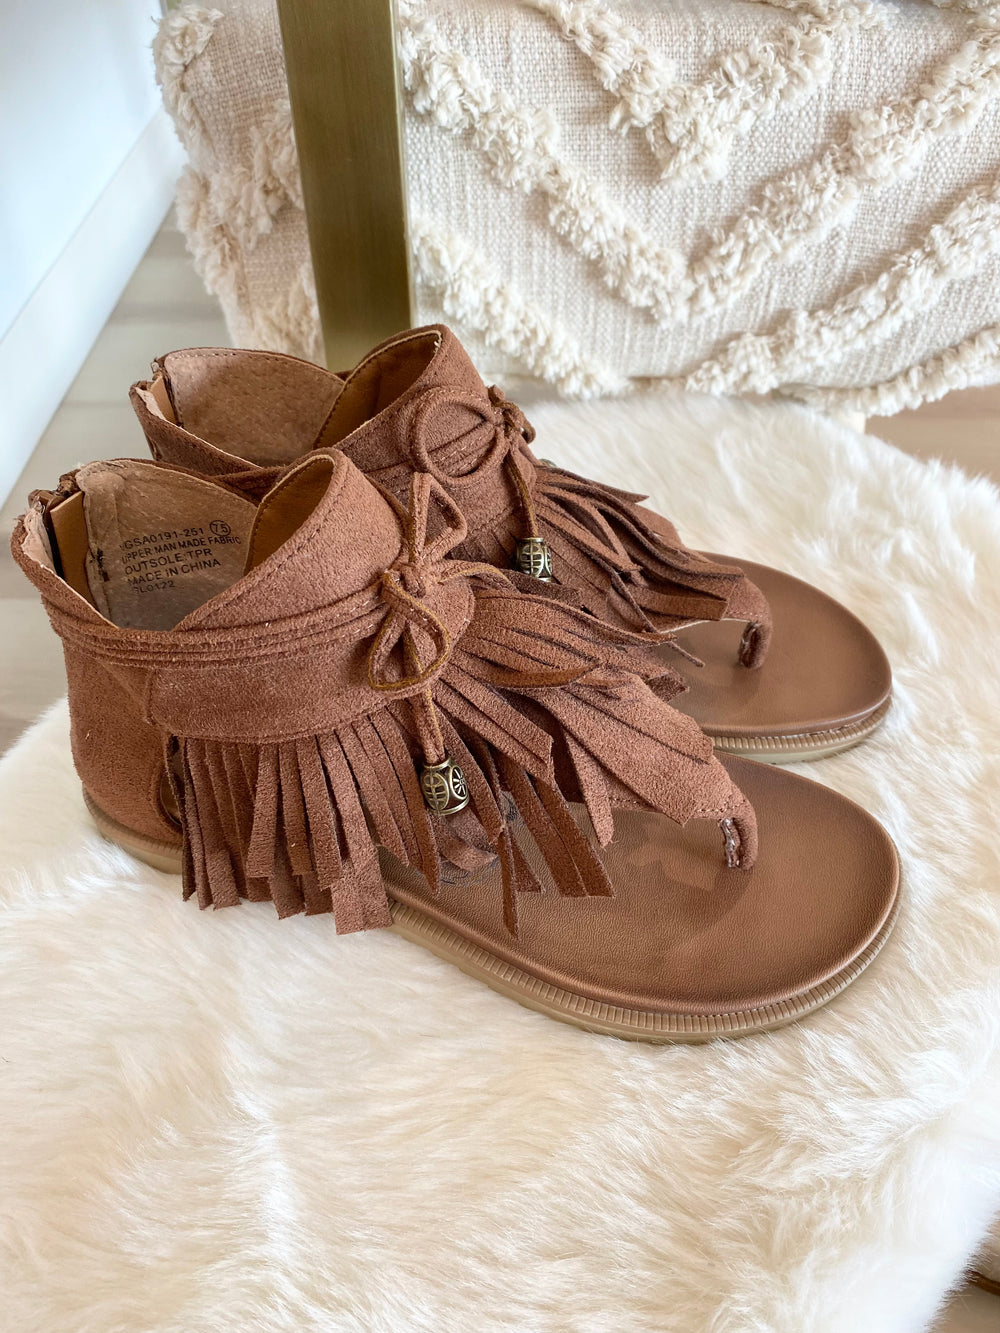 I See You Sandals - Tan - The Teal Antler Boutique